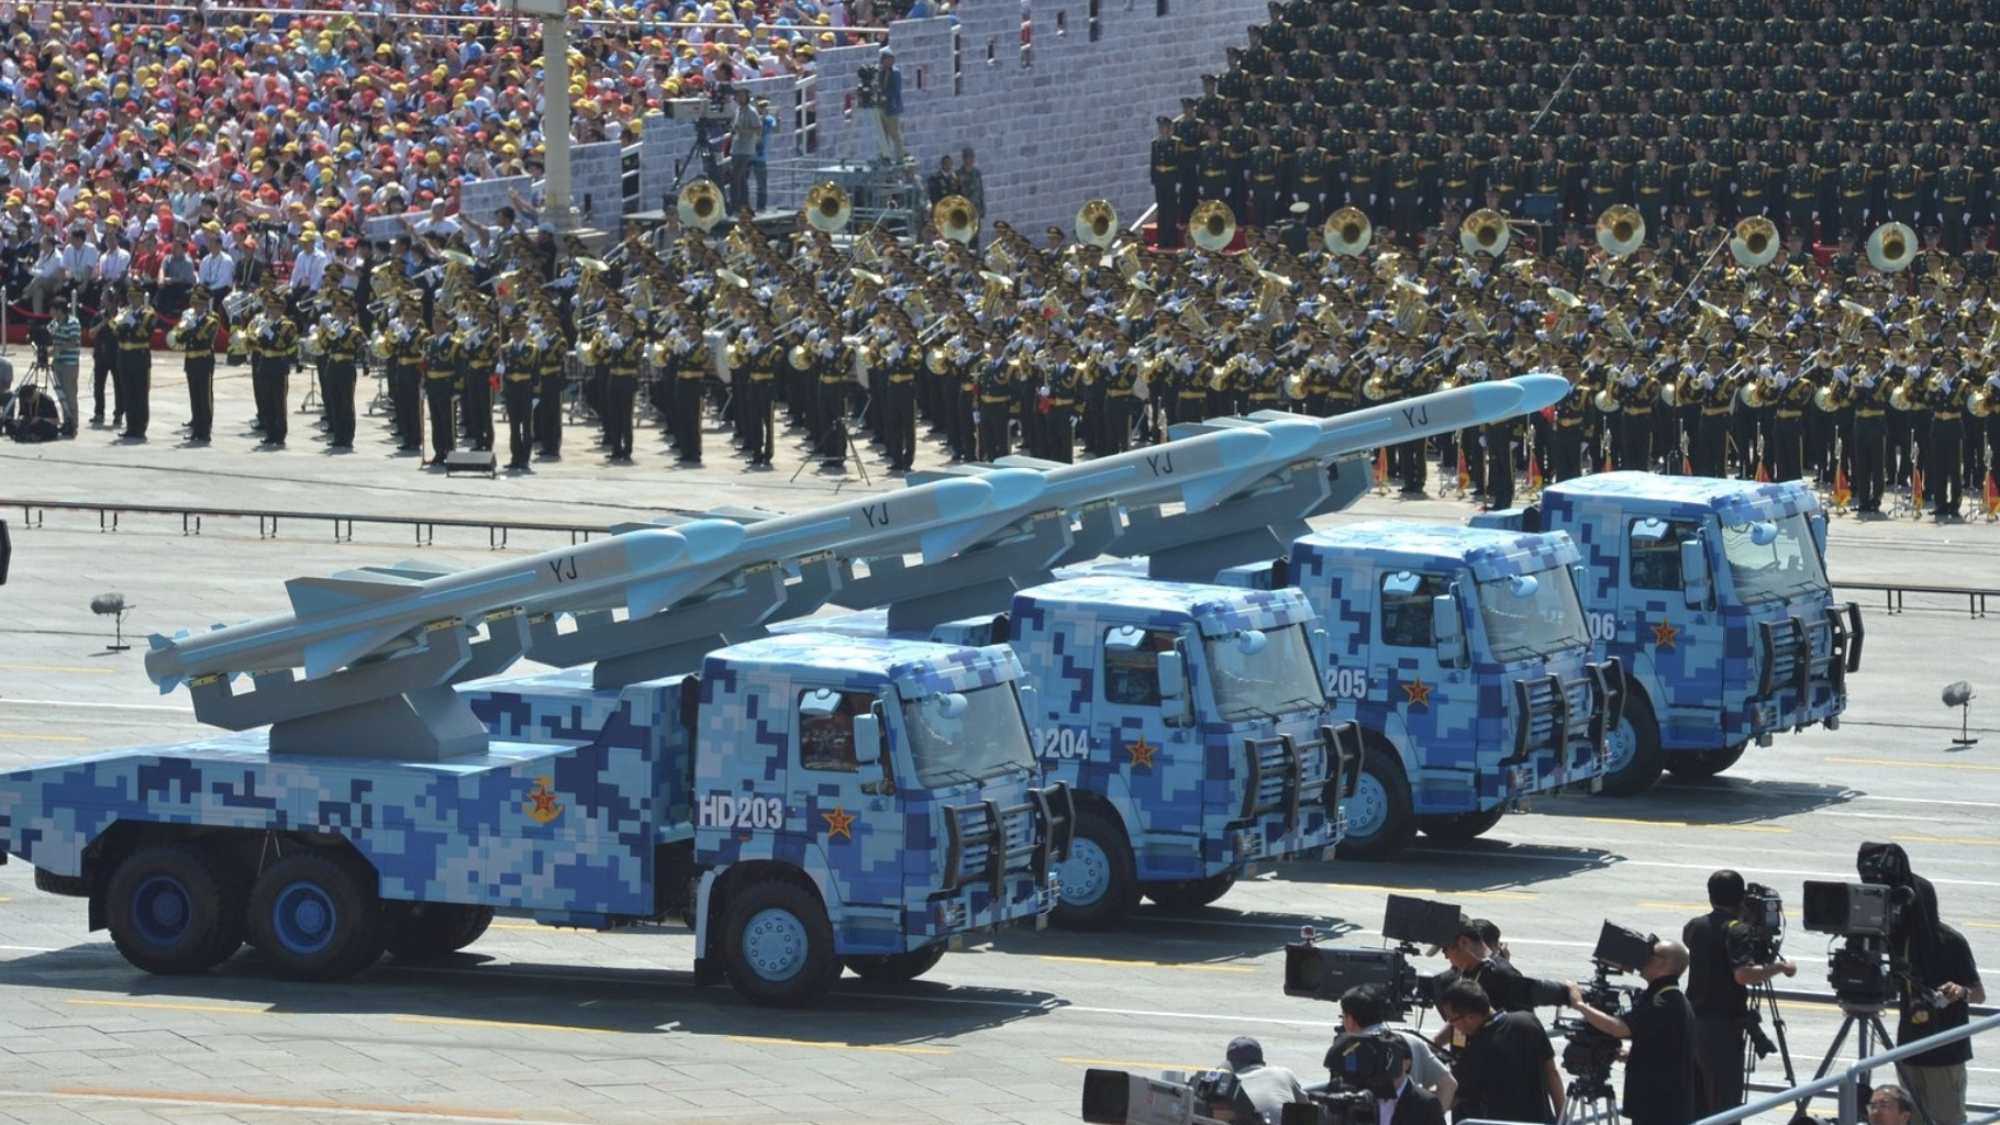 Four trucks carrying missiles marked YJ drive down the road as part of China's 70th National Day parade.